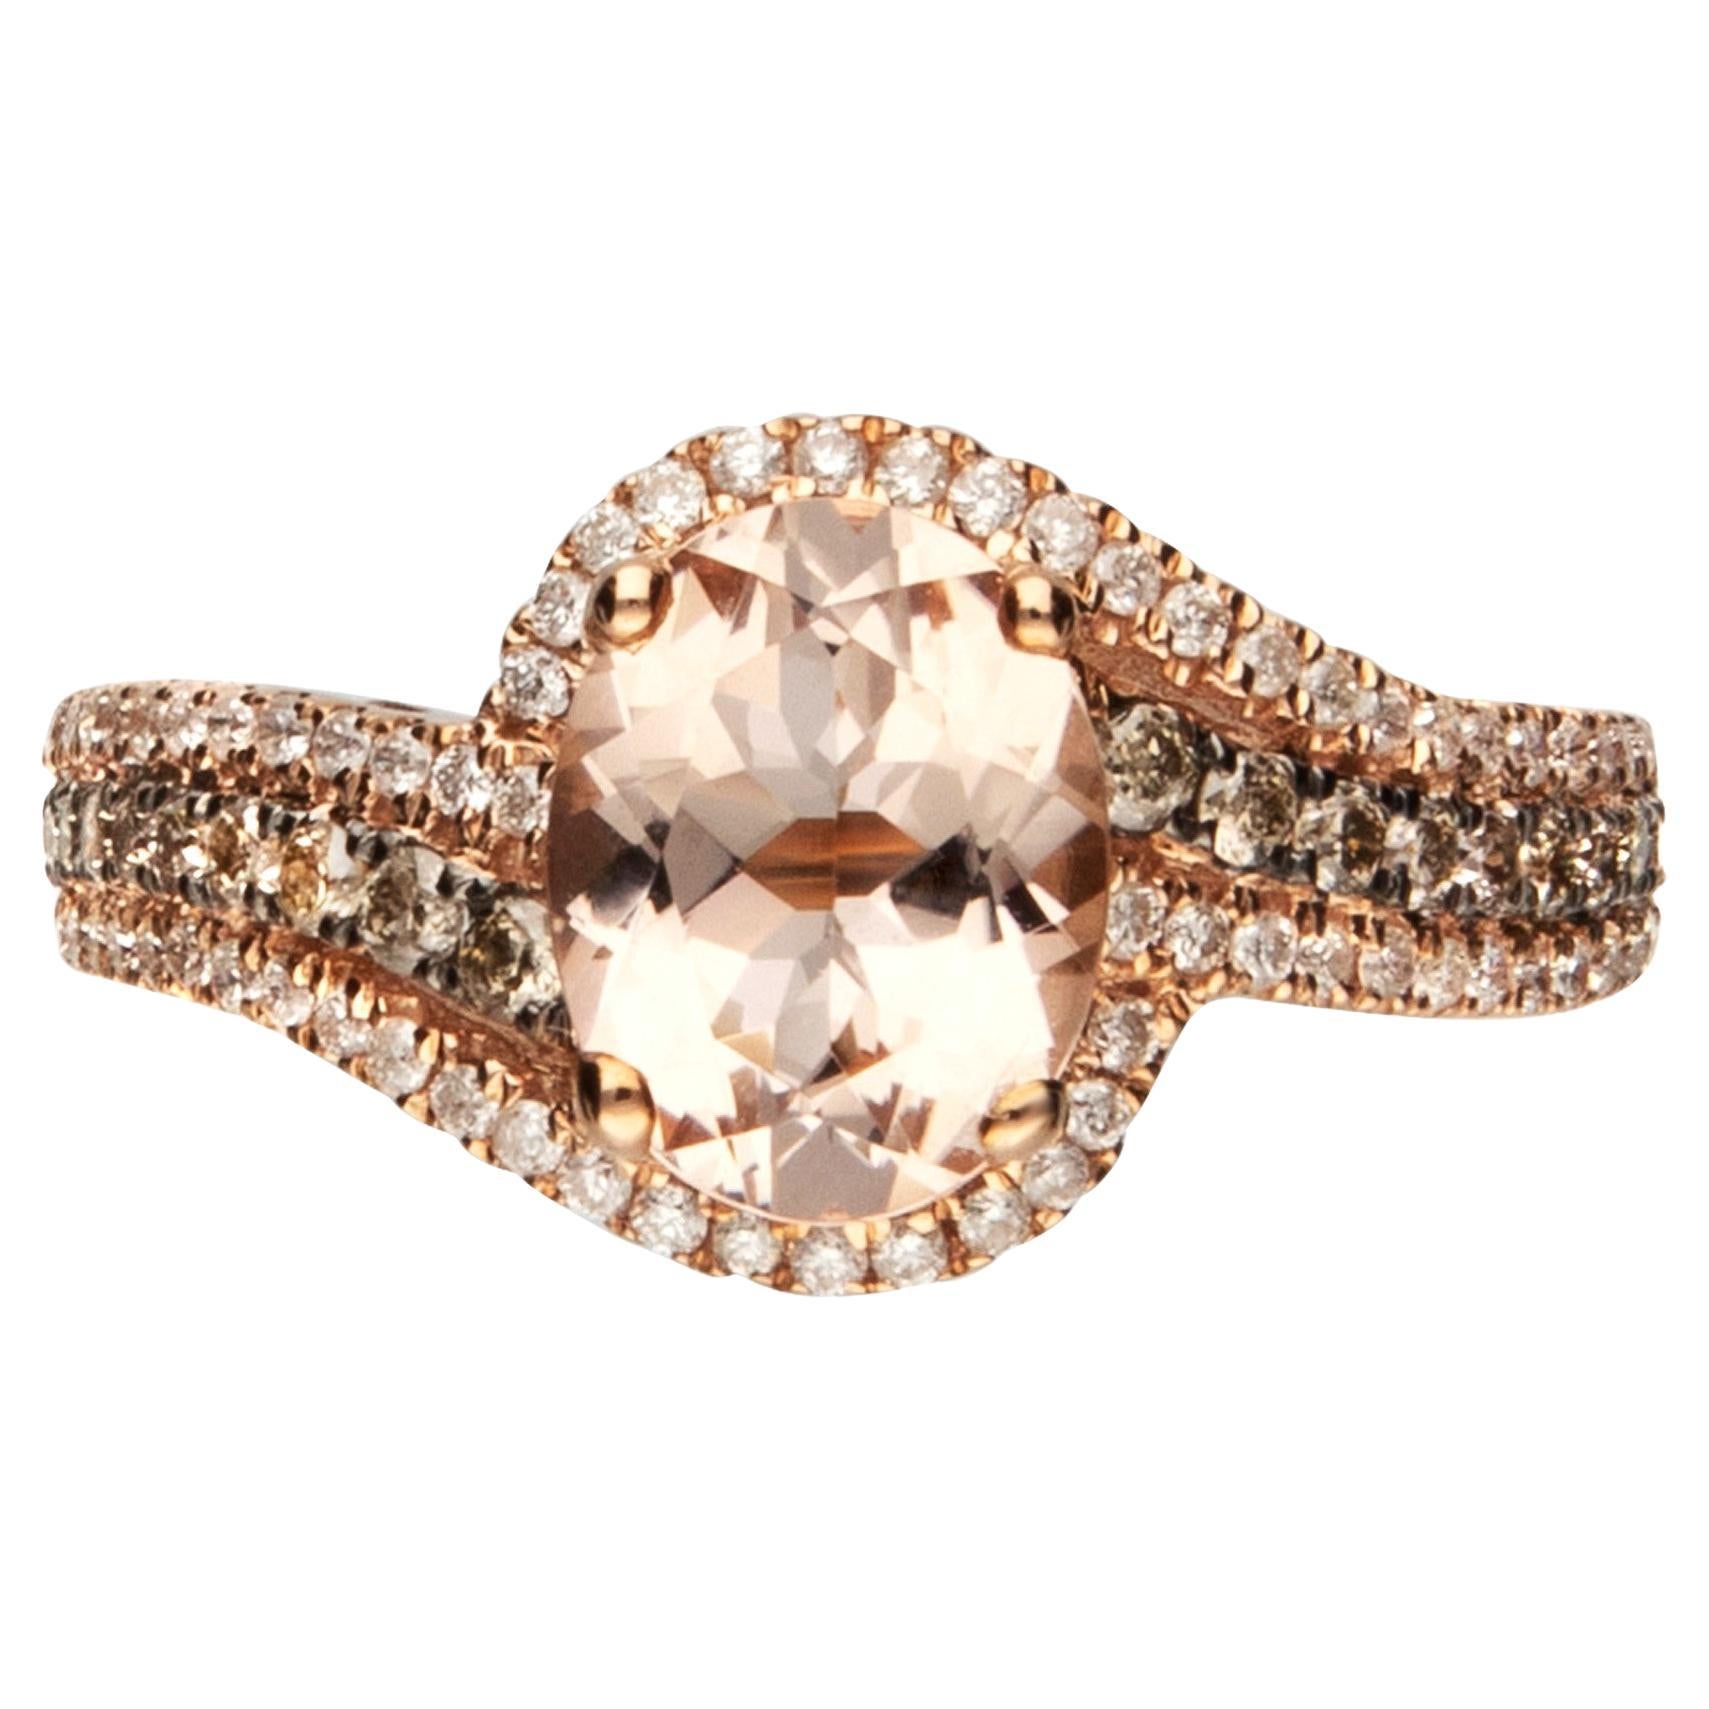 1.67 Carat Morganite Oval Cut Diamond Accents 10K Rose Gold Engagement Ring